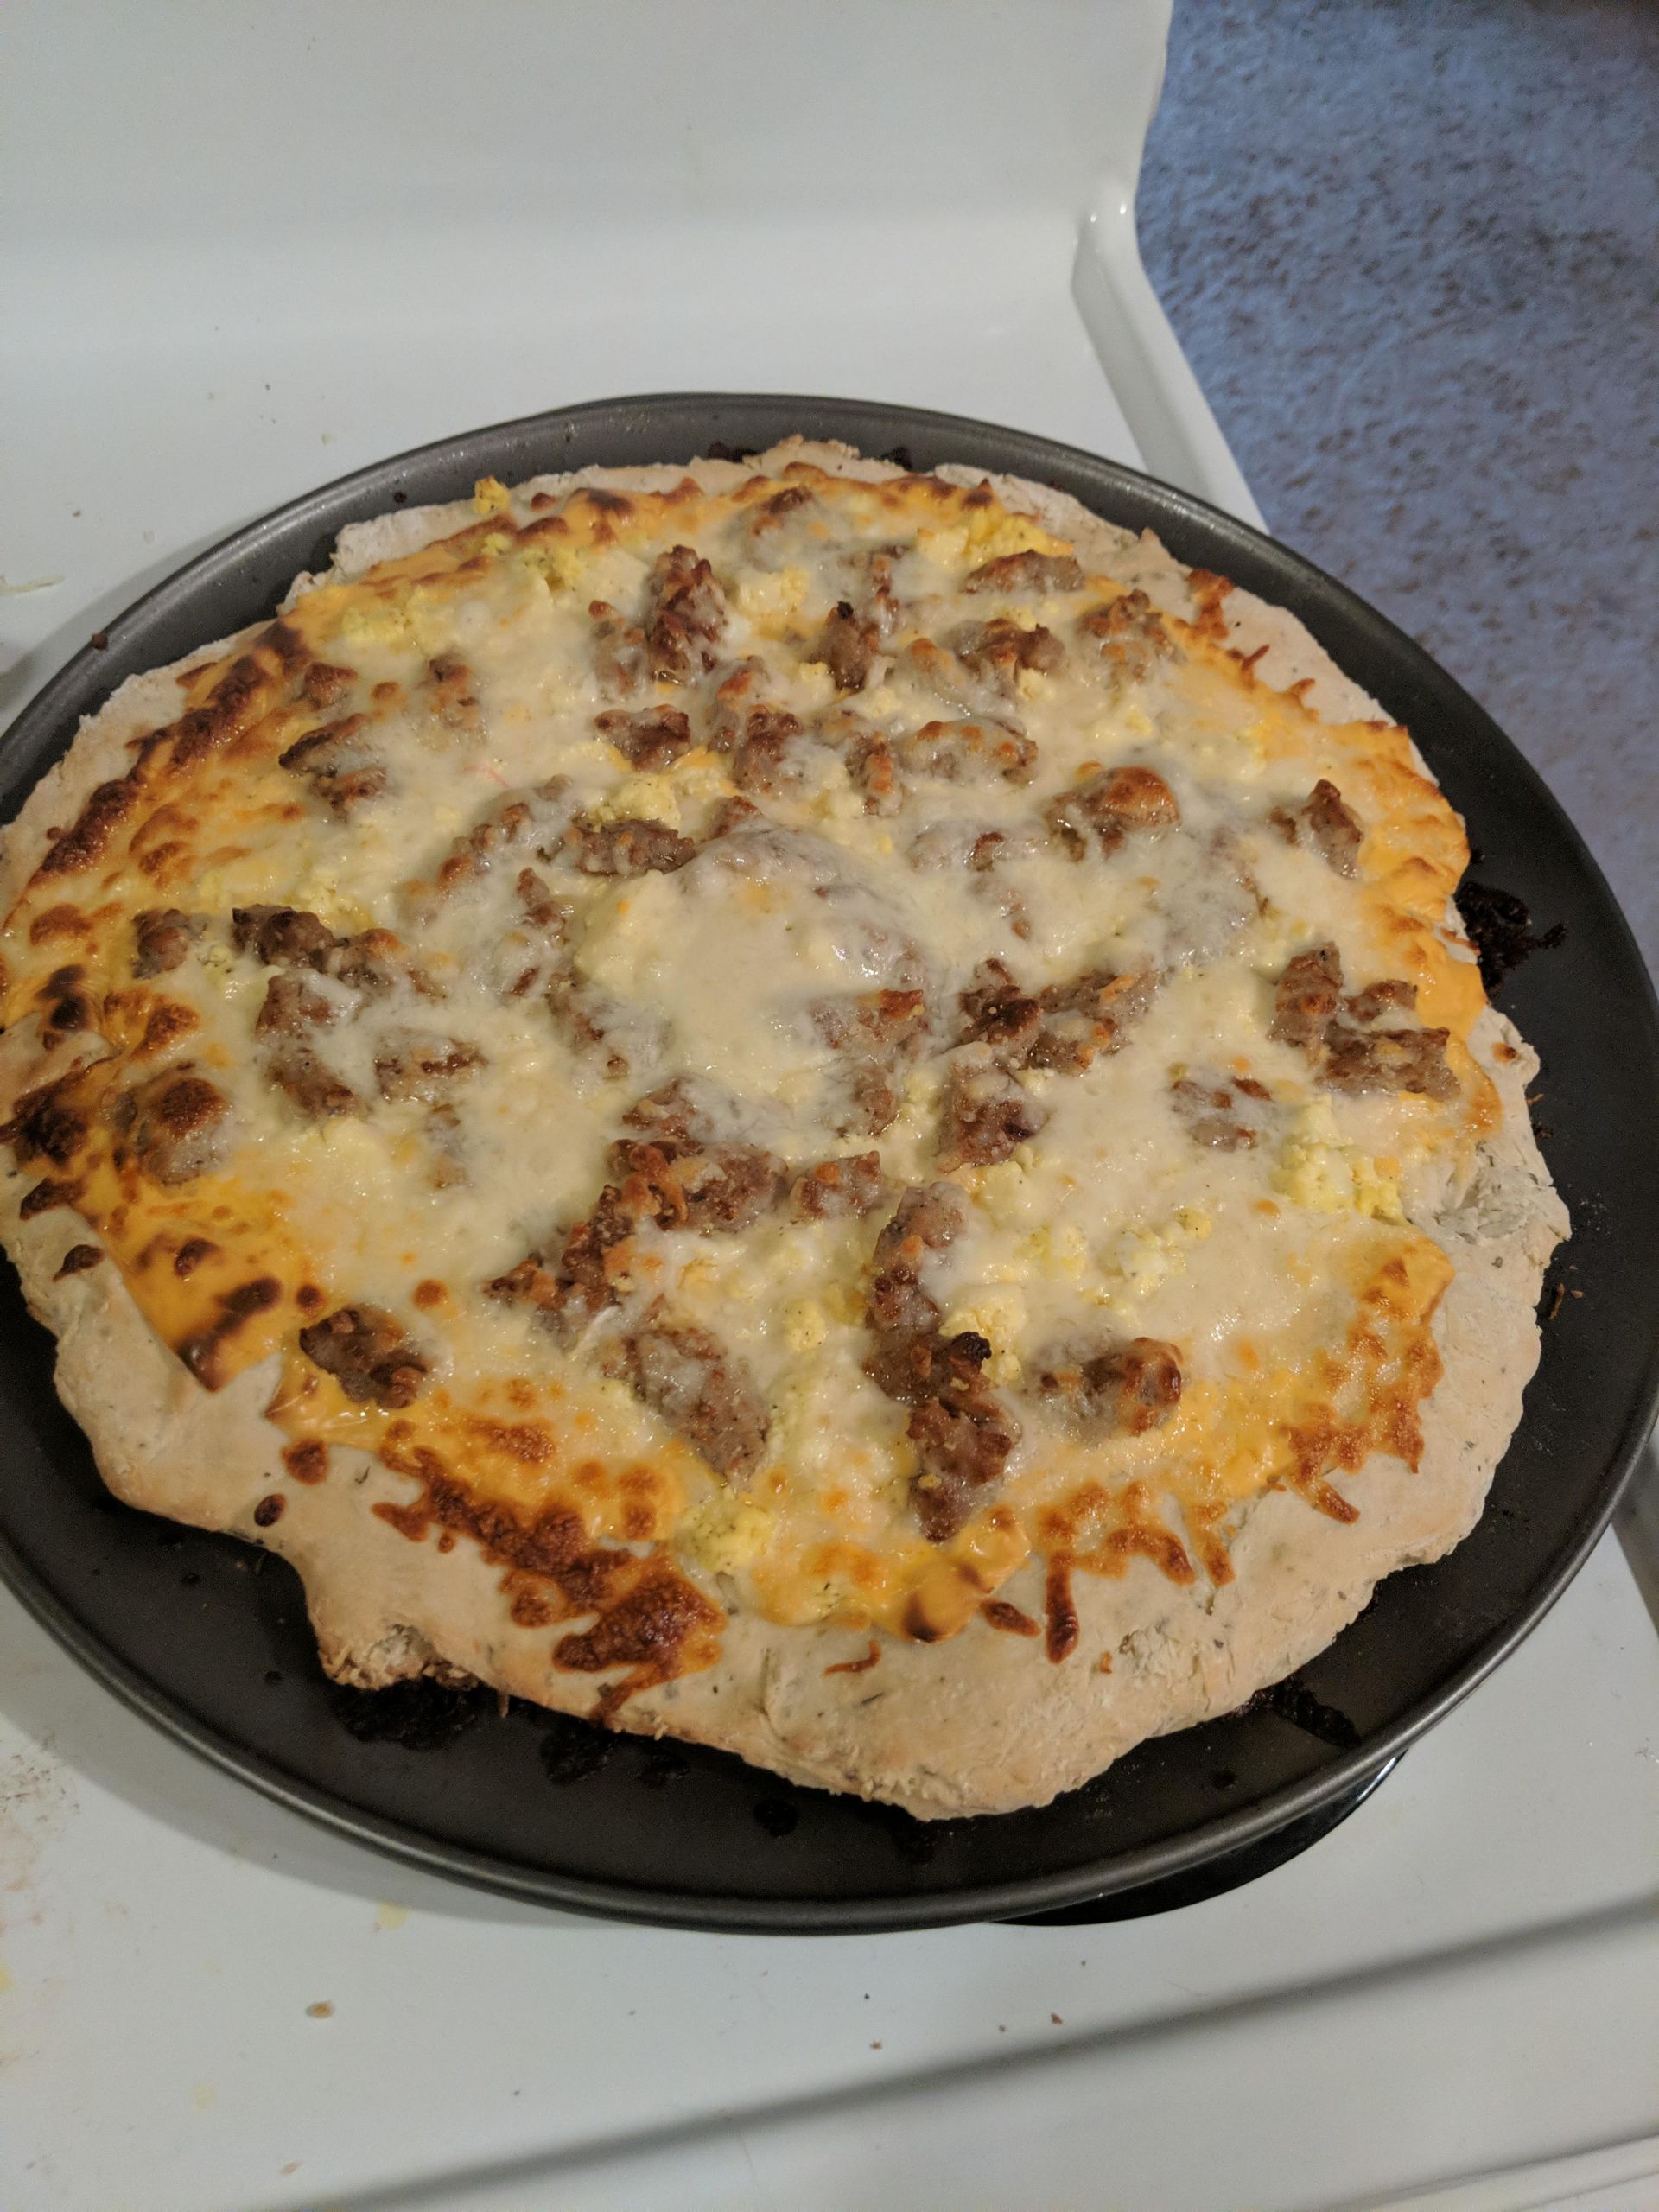 Tops Breakfast Pizza
 First time baking I tried to make Tops Breakfast Pizza